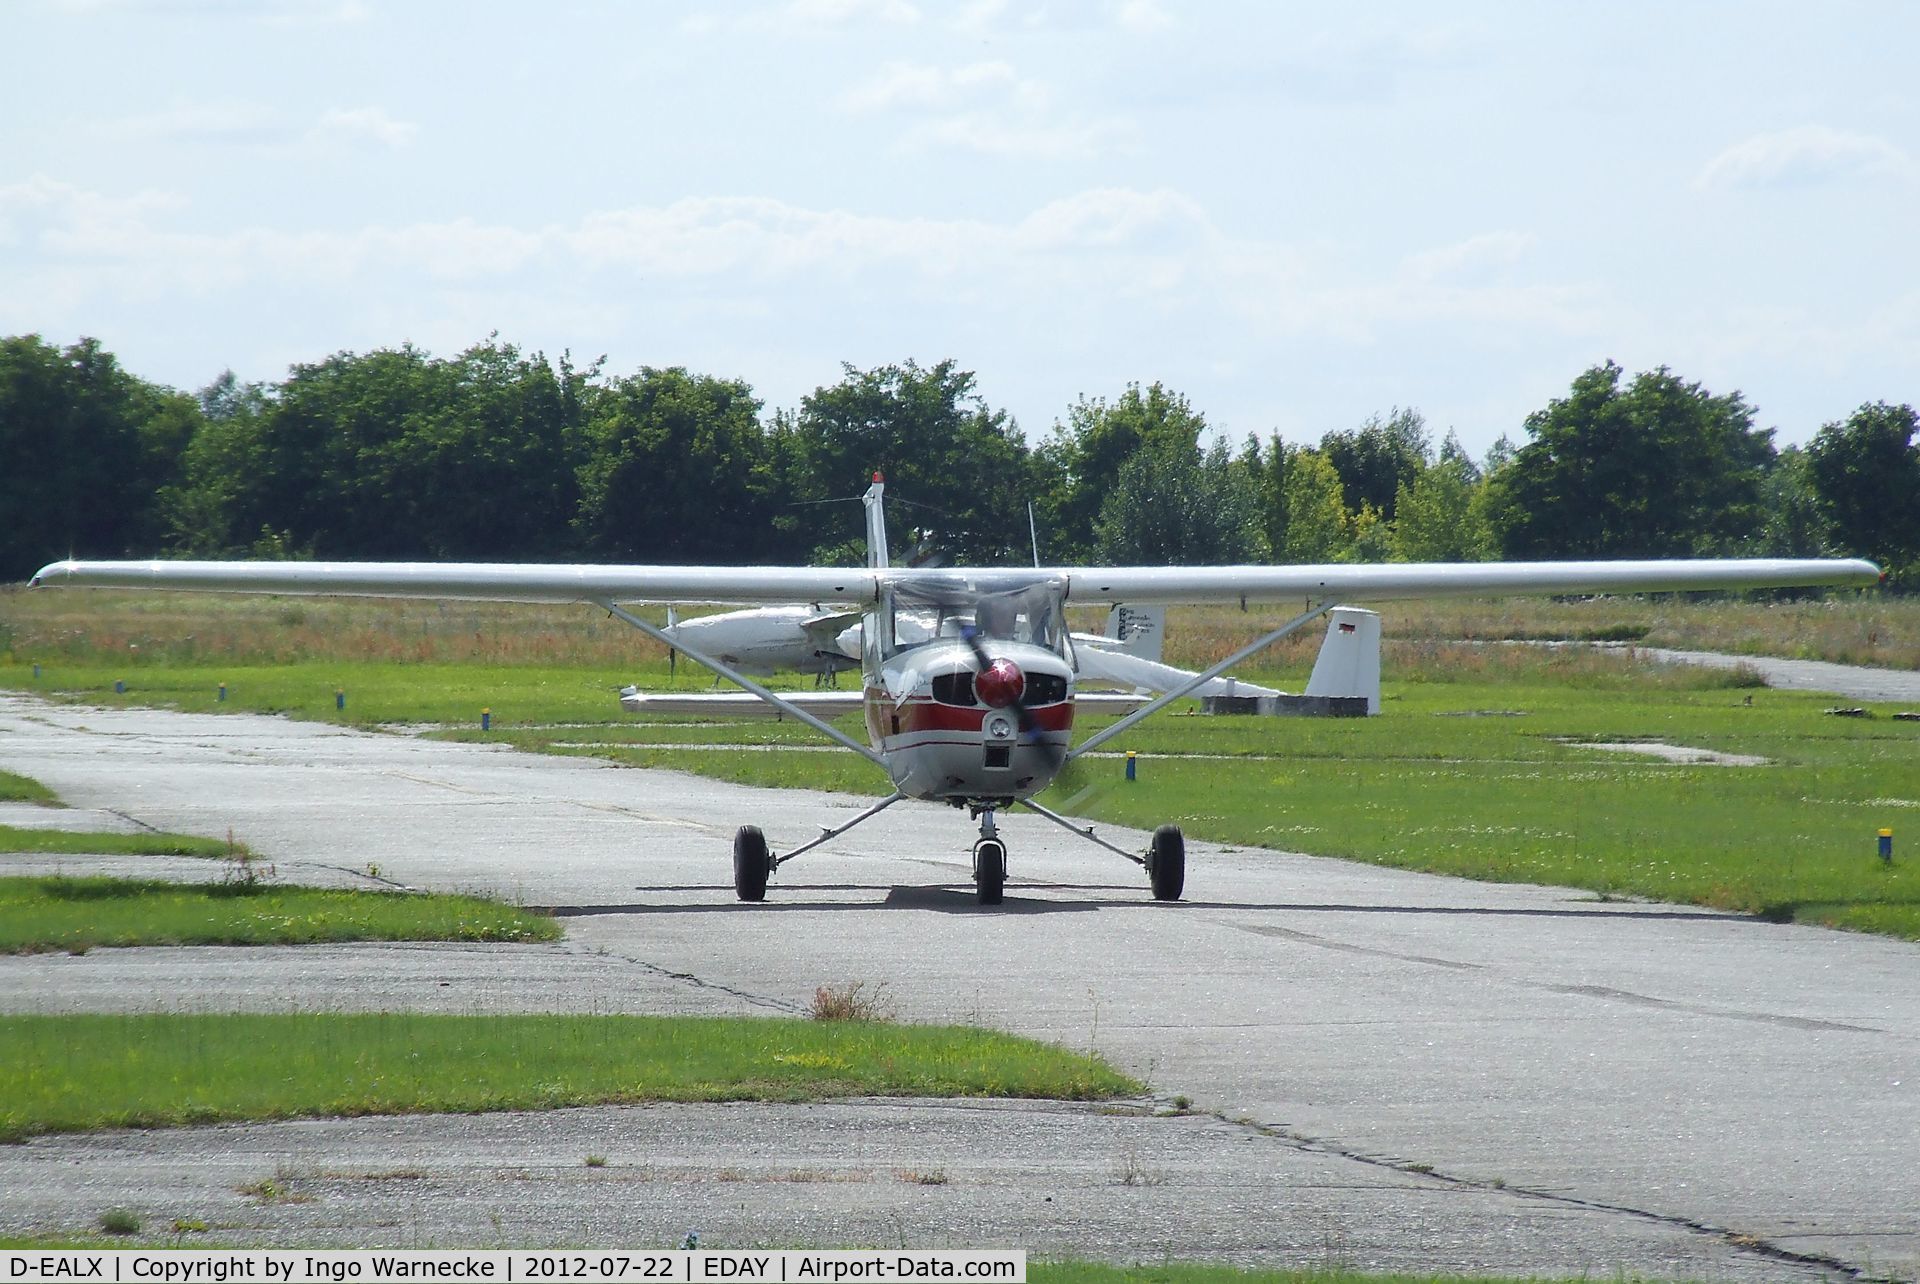 D-EALX, Cessna 150 C/N Not found, Cessna 150 at Strausberg airfield